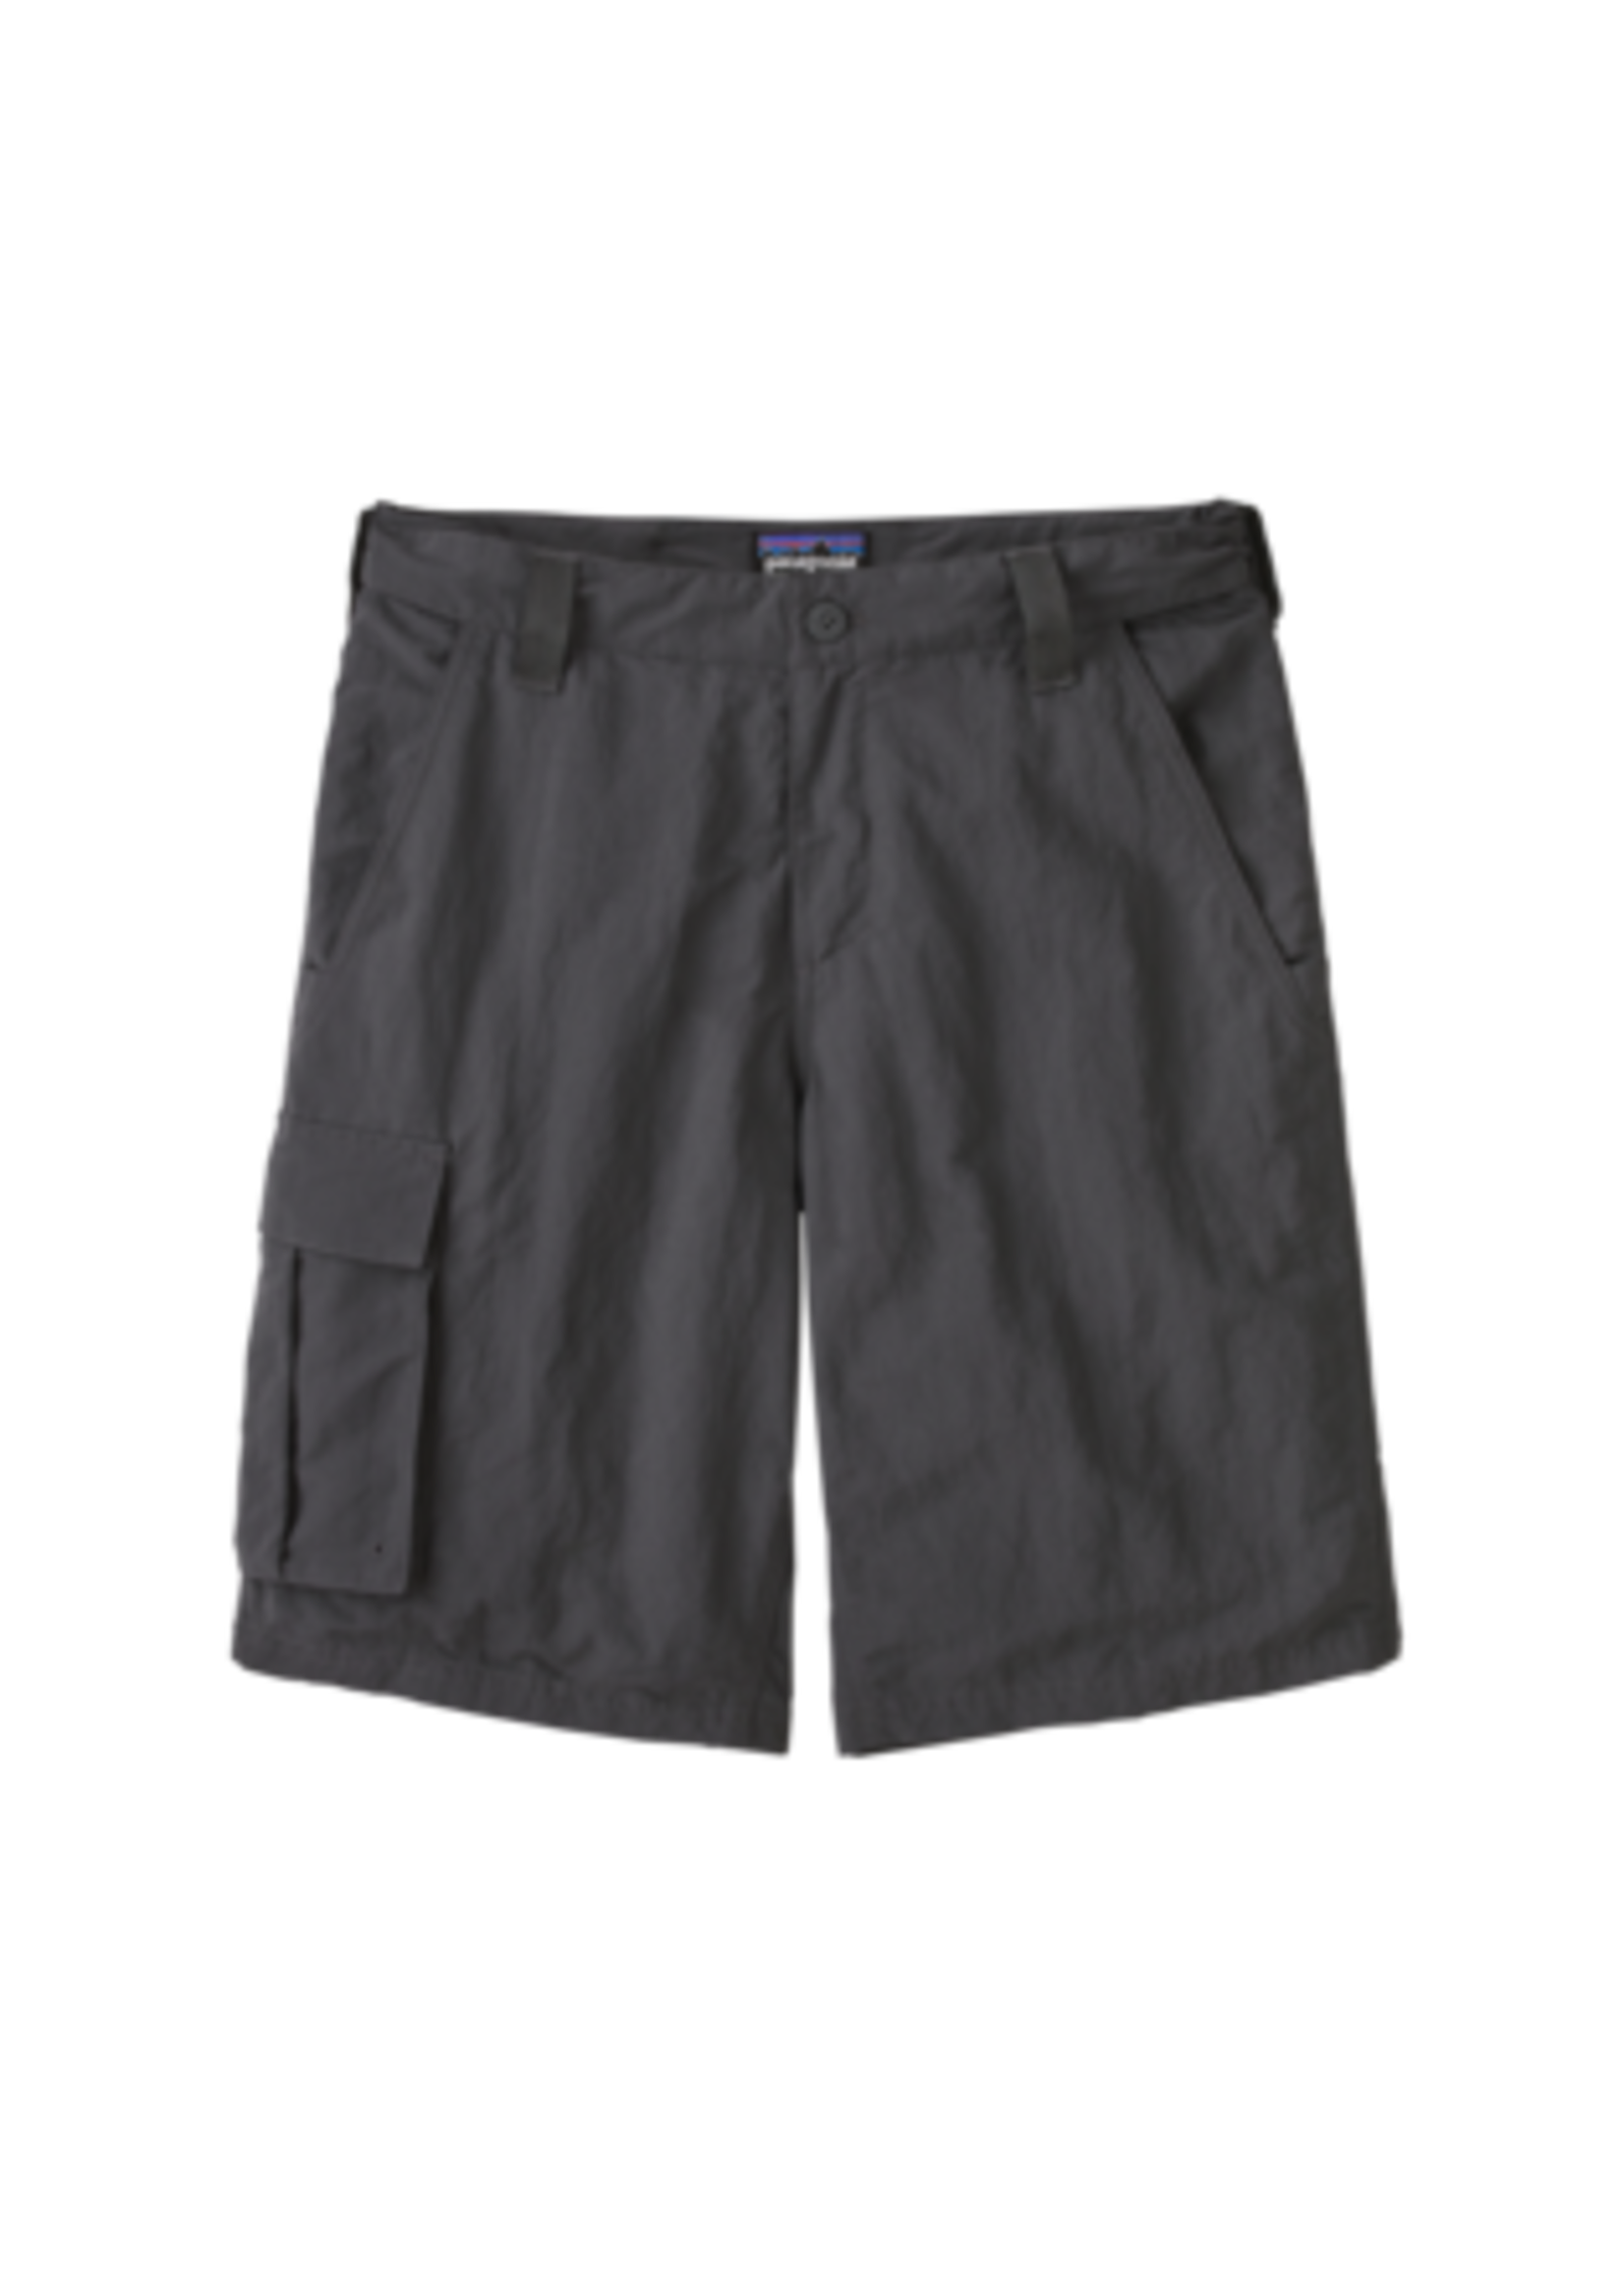 Patagonia M's Swiftcurrent Wet Wade Shorts - Forge Grey